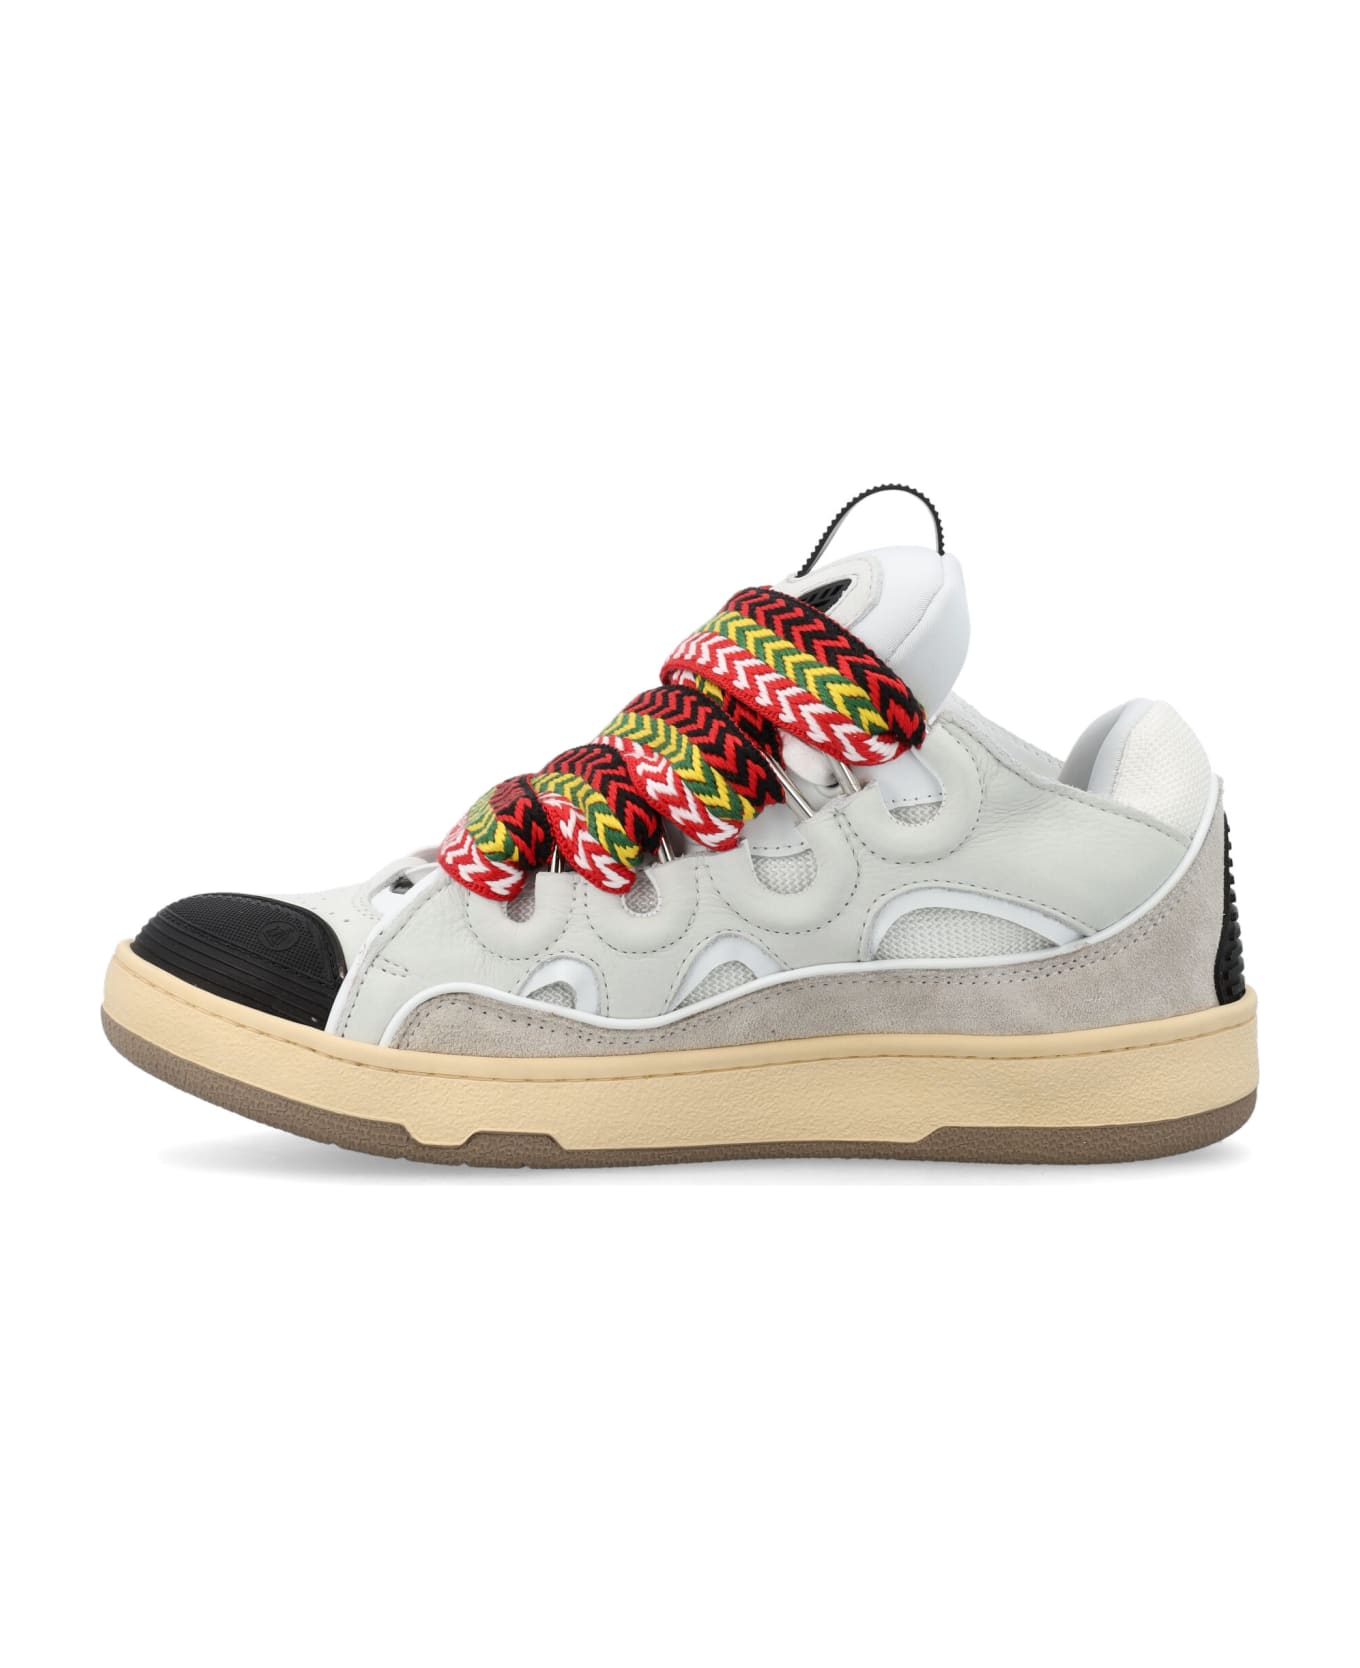 Lanvin Leather Curb Sneakers - WHITE